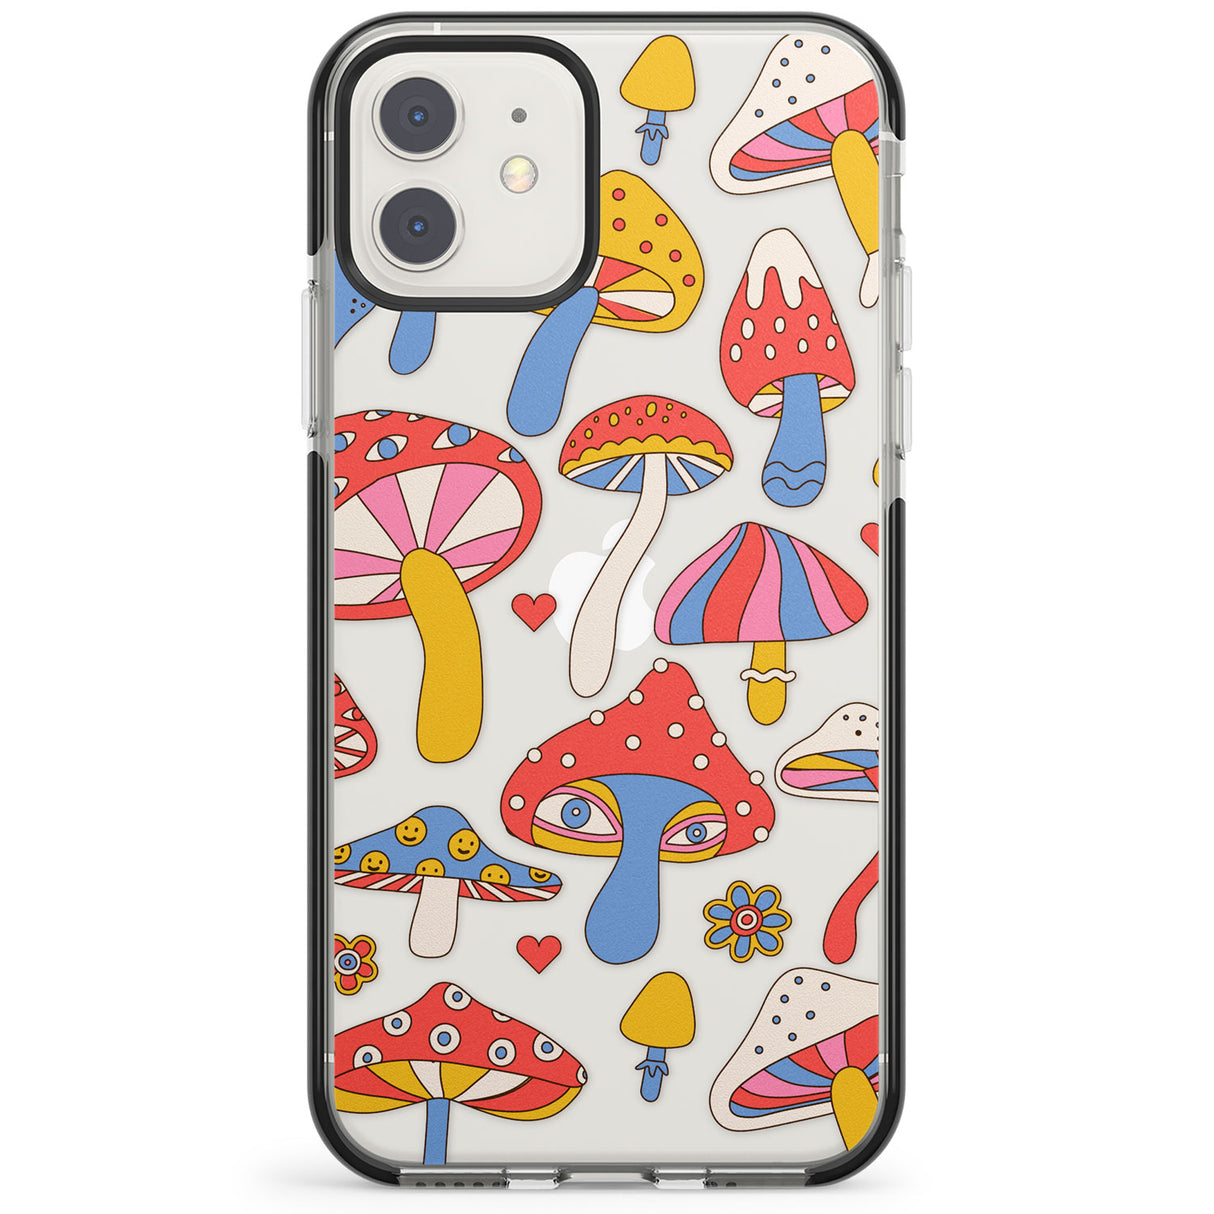 Vibrant Shrooms Impact Phone Case for iPhone 11, iphone 12